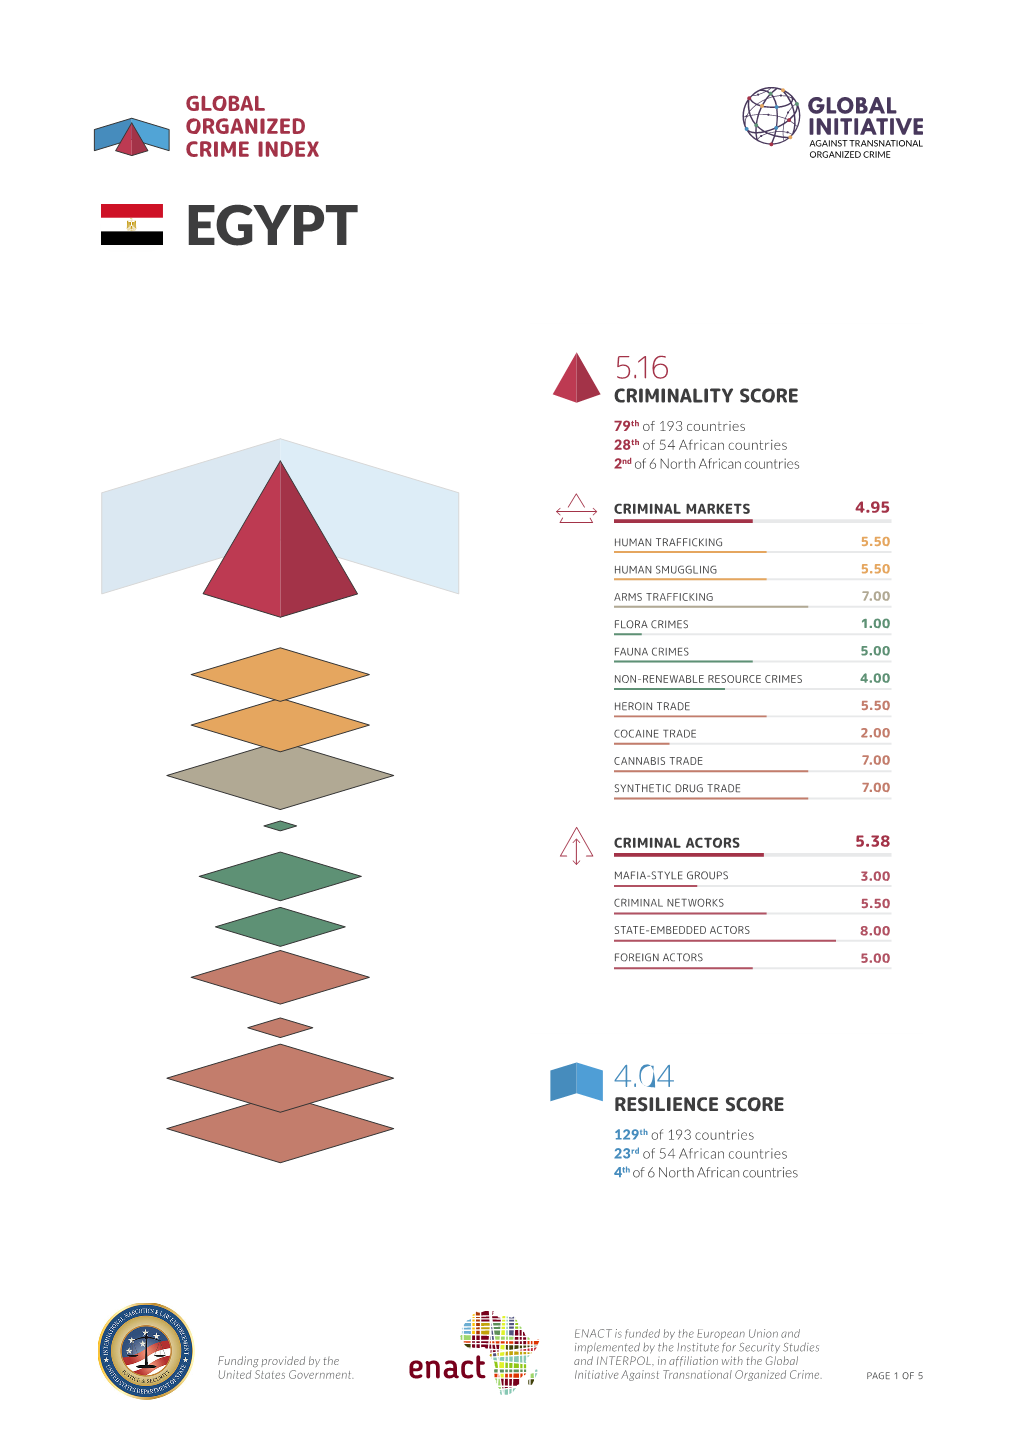 5.63 in Terms of Criminality, Egypt's Index Score of 5.14 Places It 22Nd In